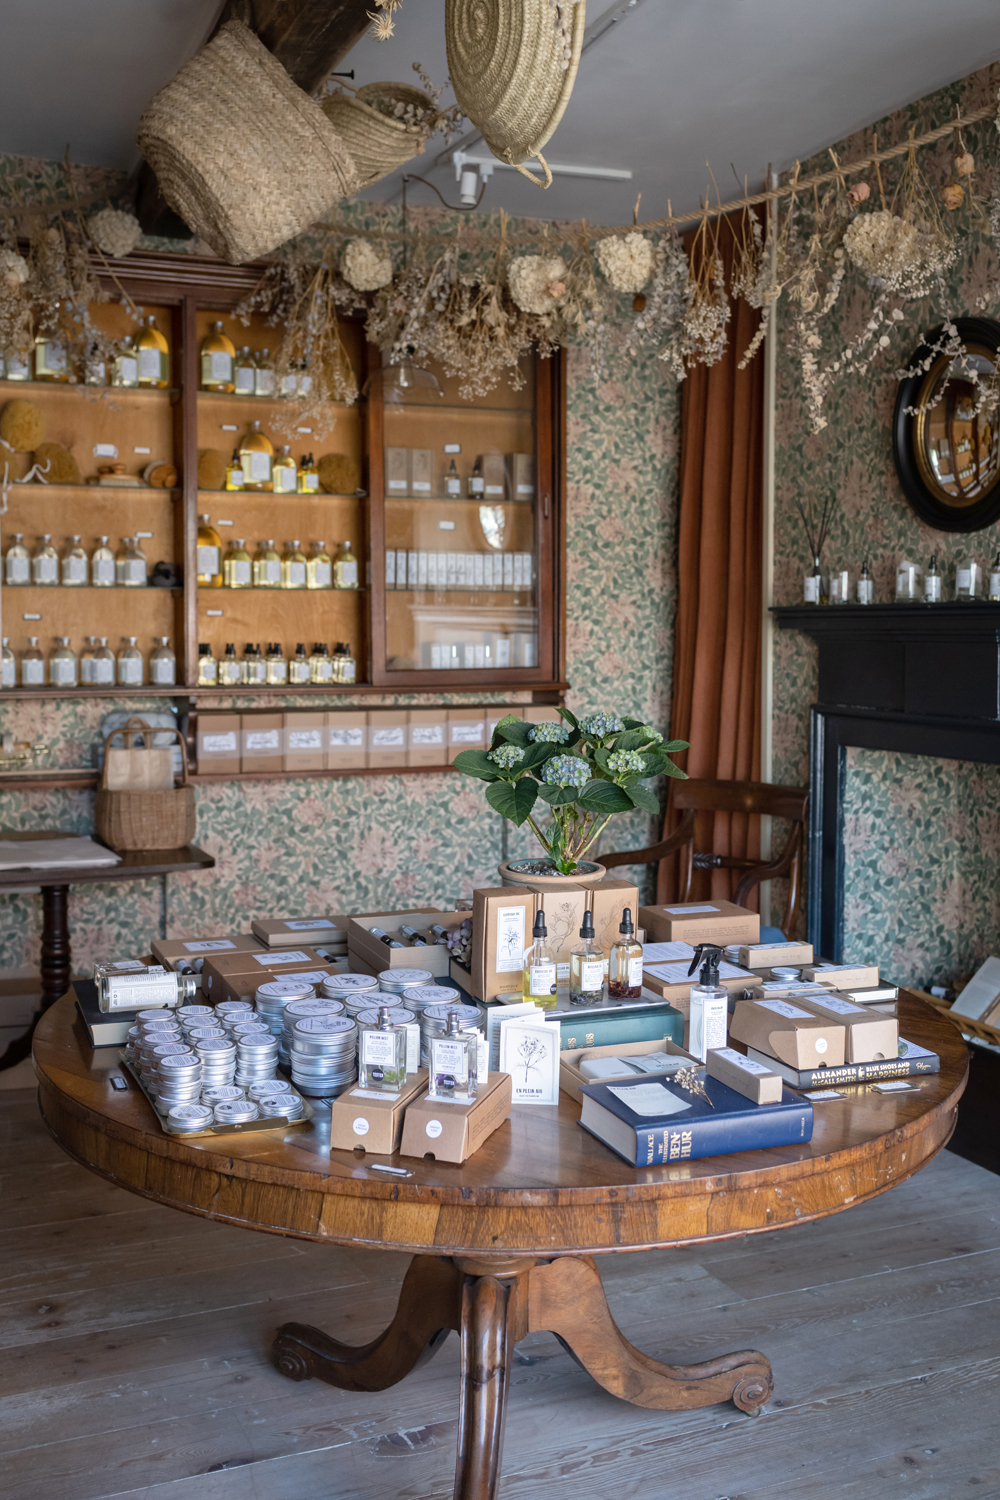 British made fragrance inside apothecary cabinets in Norfolk Natural Living's Perfumery shop, Holt, Norfolk